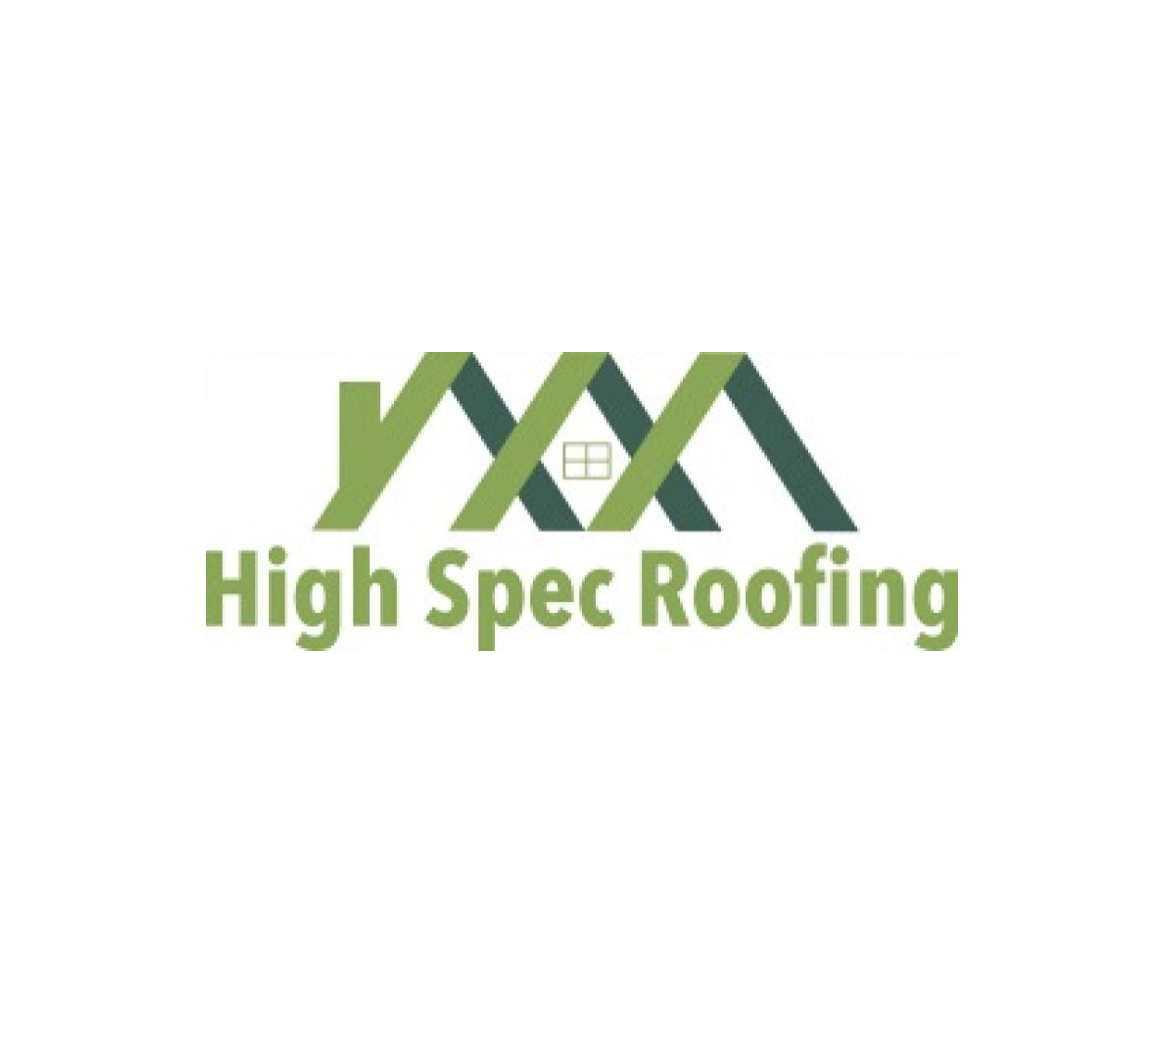 Logo of High Spec Roofing